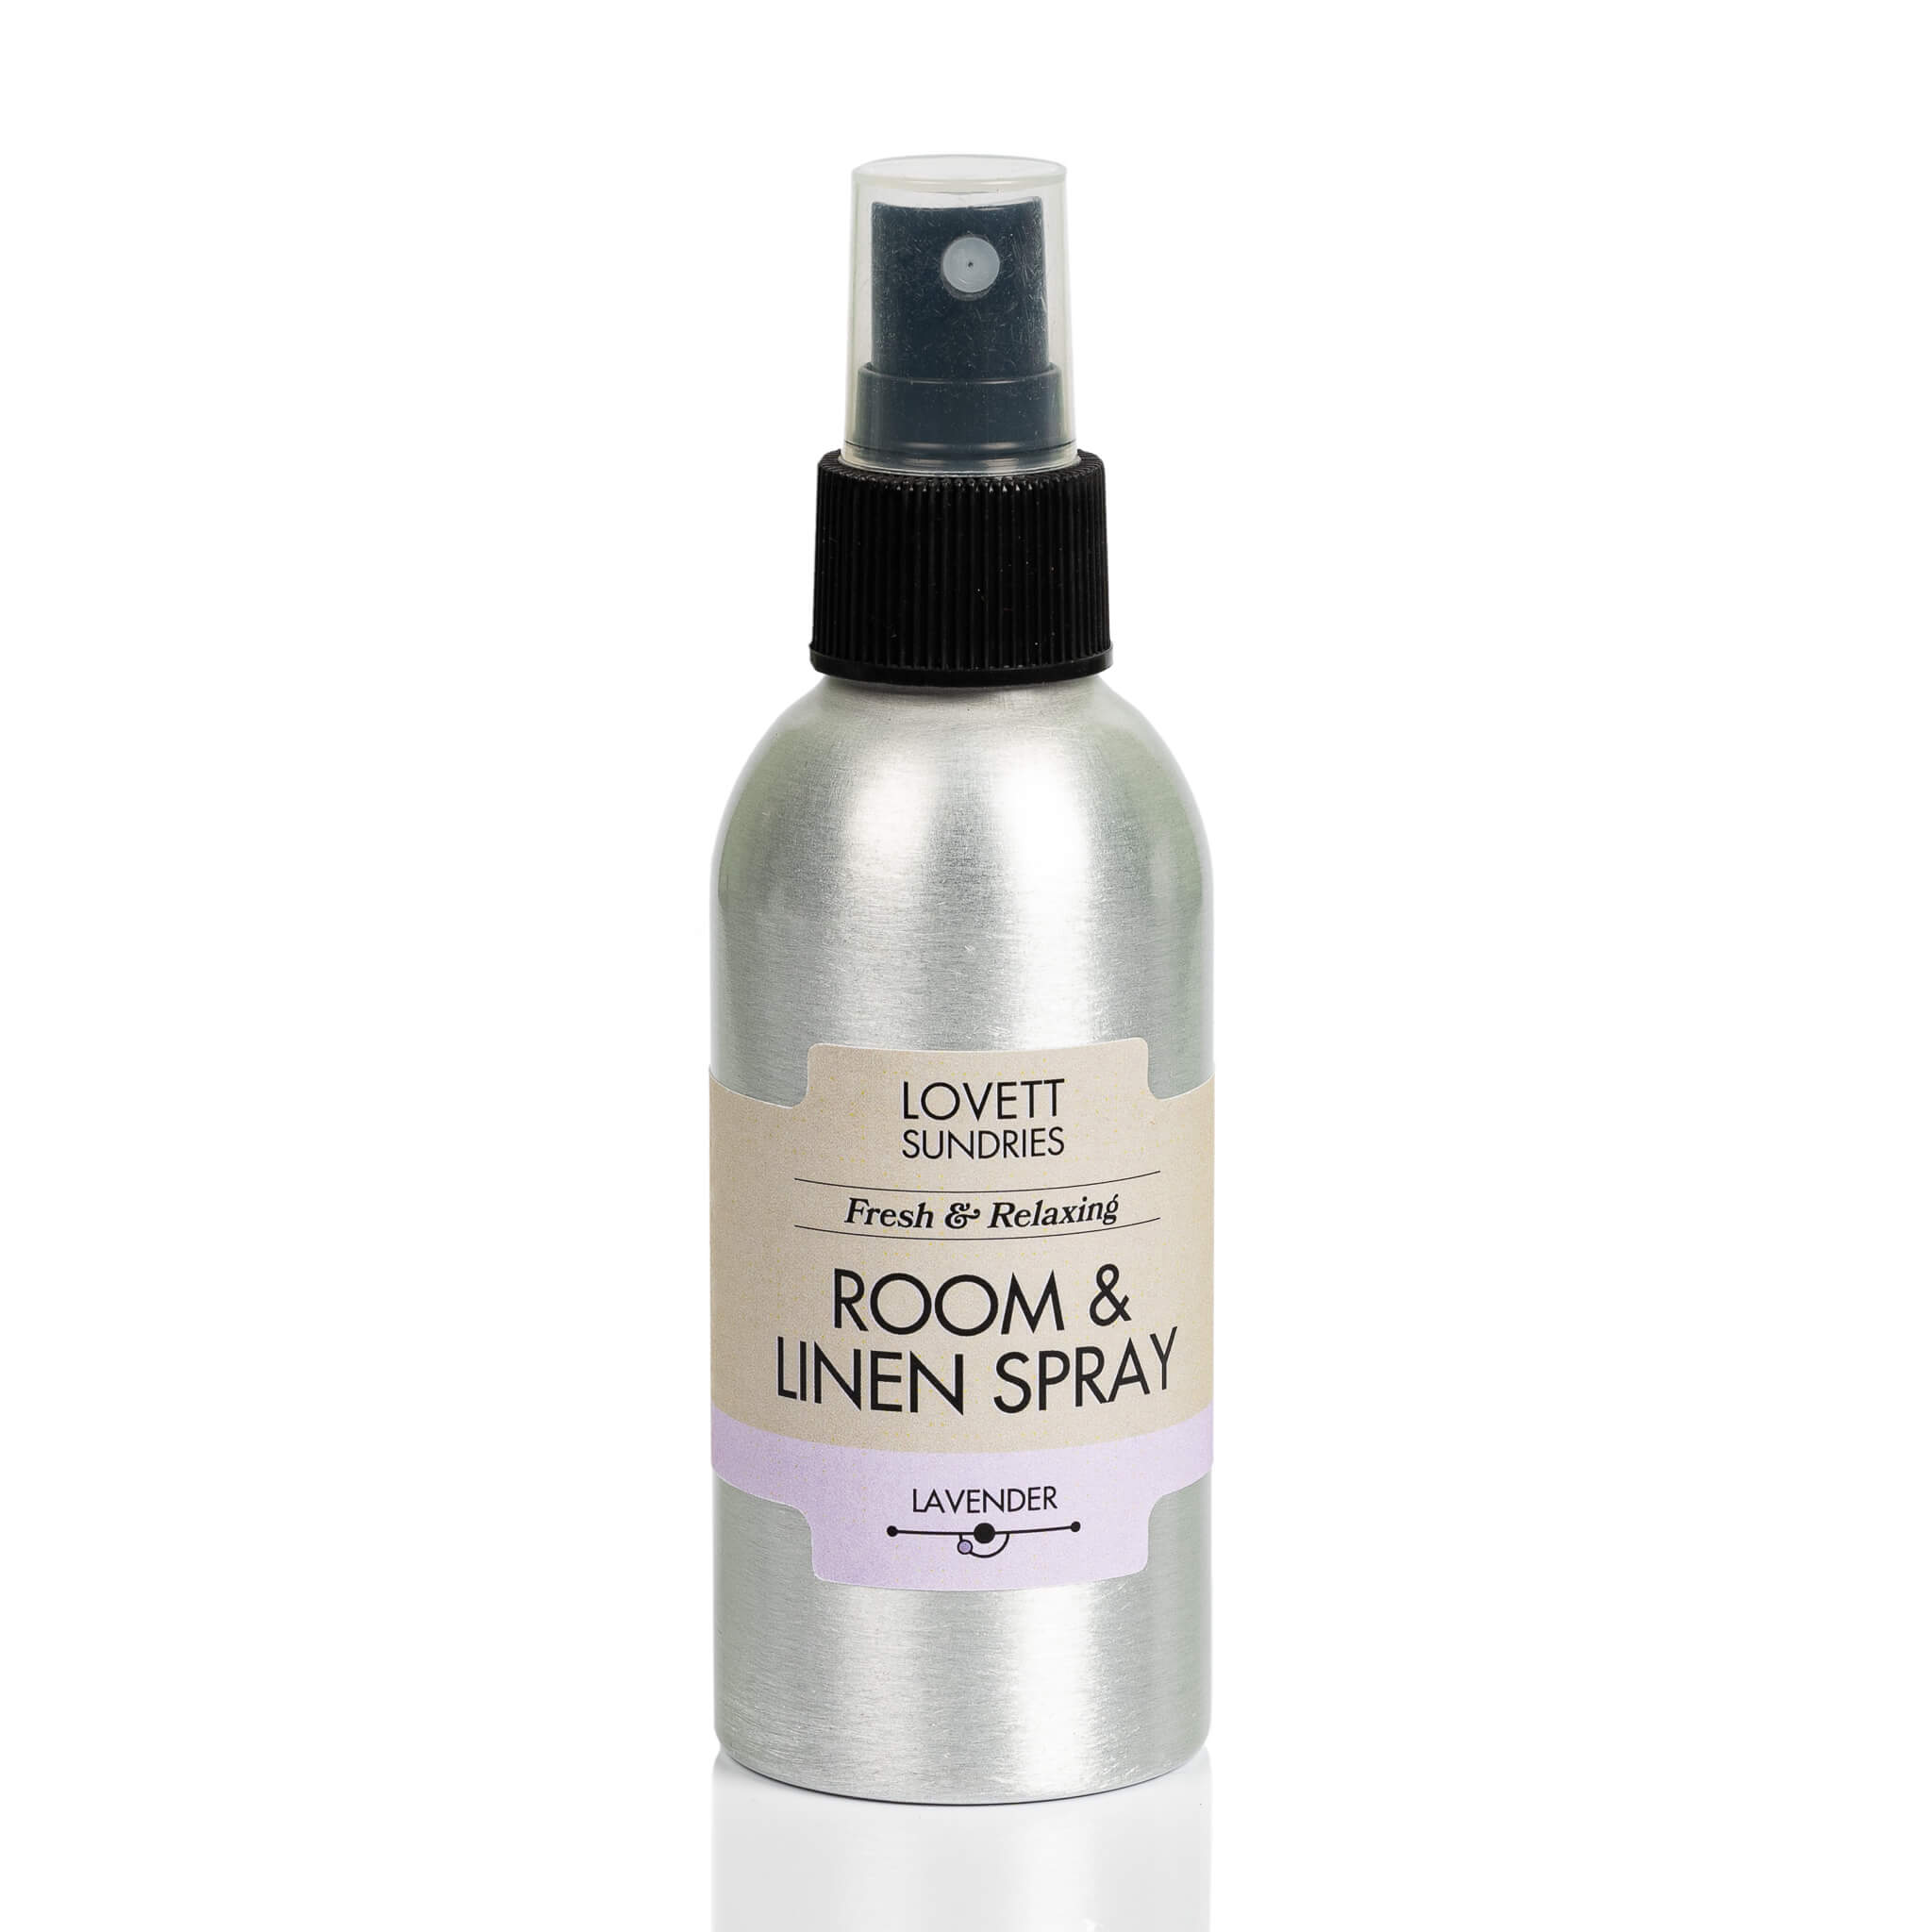 All natrual essential oil based lavender scented room & linen spray in a recyclable aluminum bottle with a spray top. 